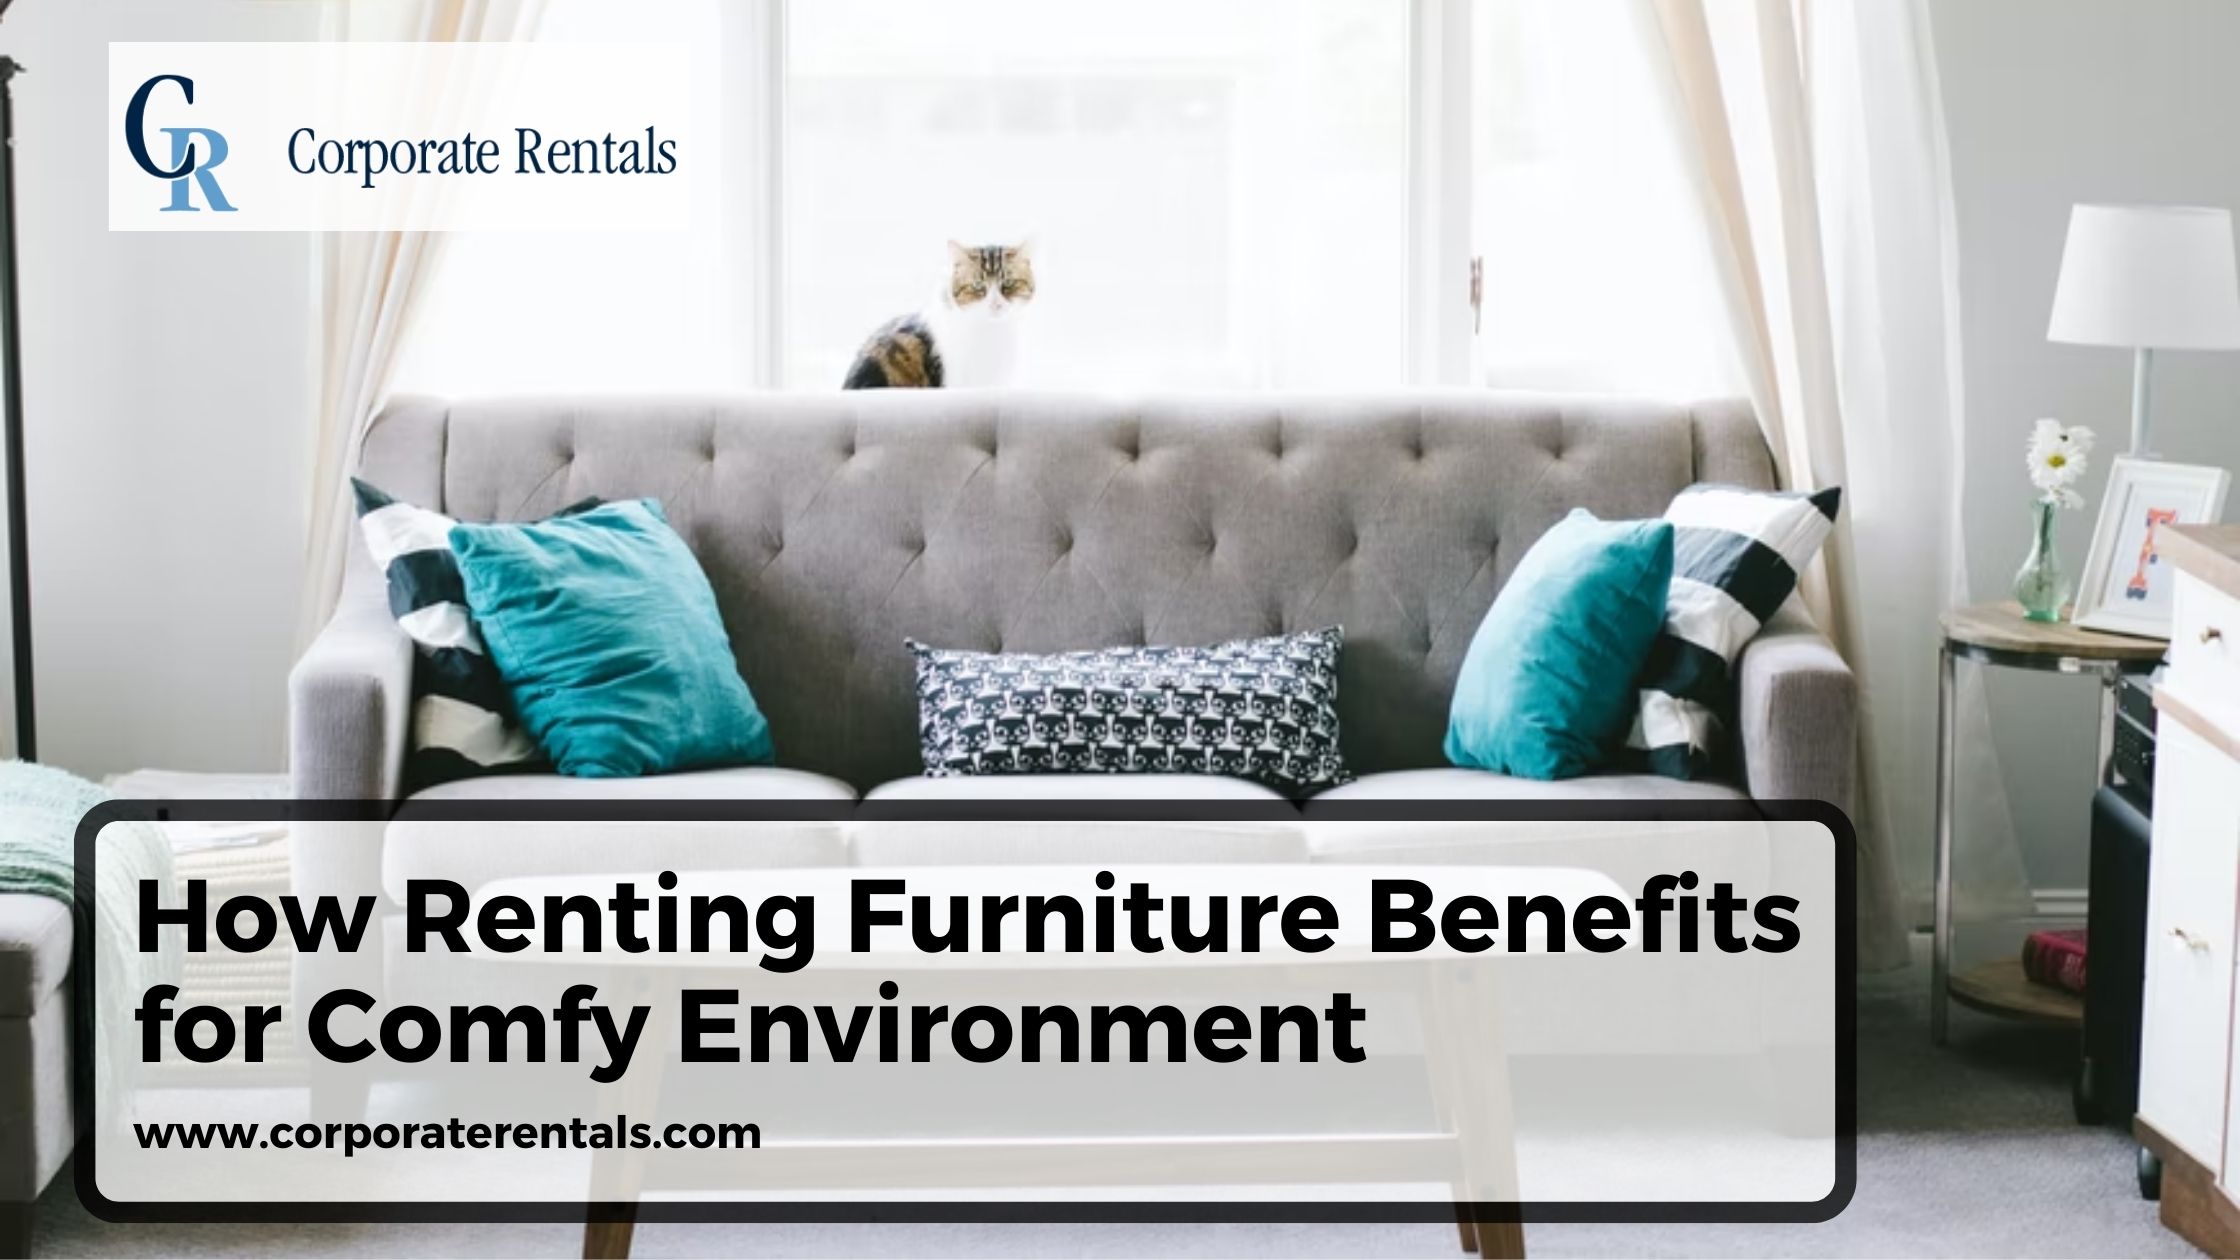 How Renting Furniture Benefits for Comfy Environment